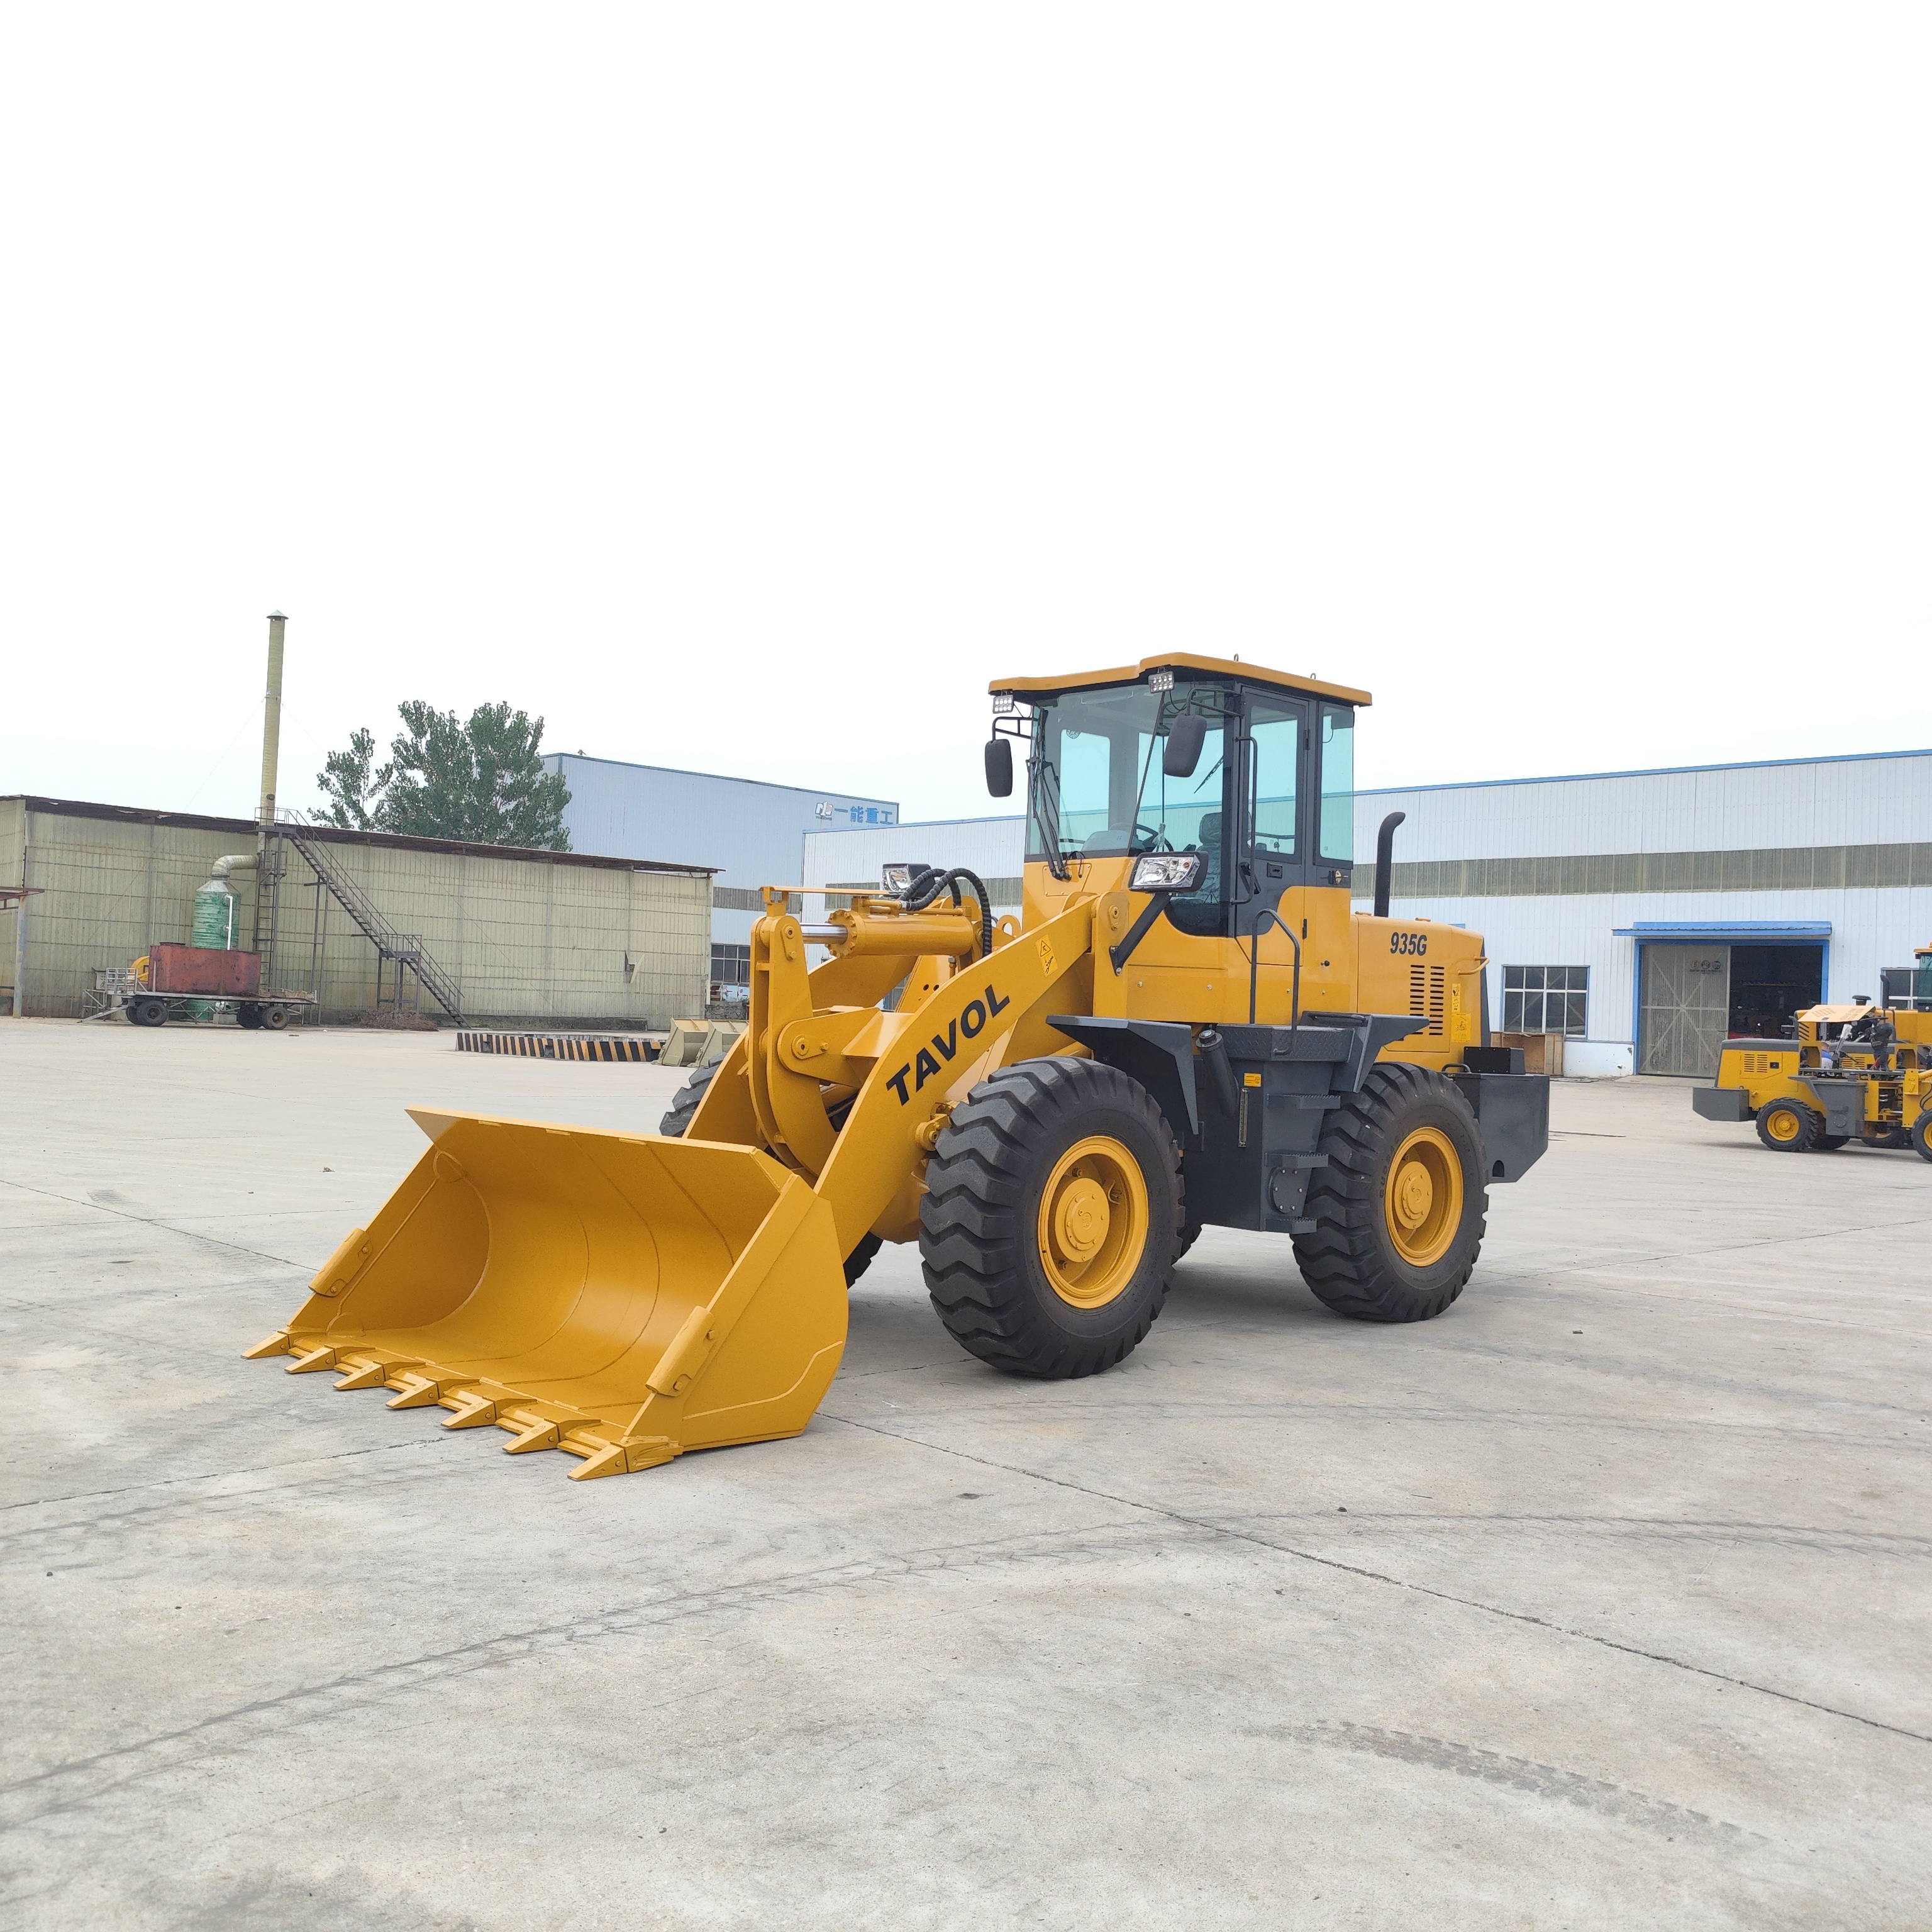 High cost Compact loader Wheel Loader in Excellent Working Condition with attachment